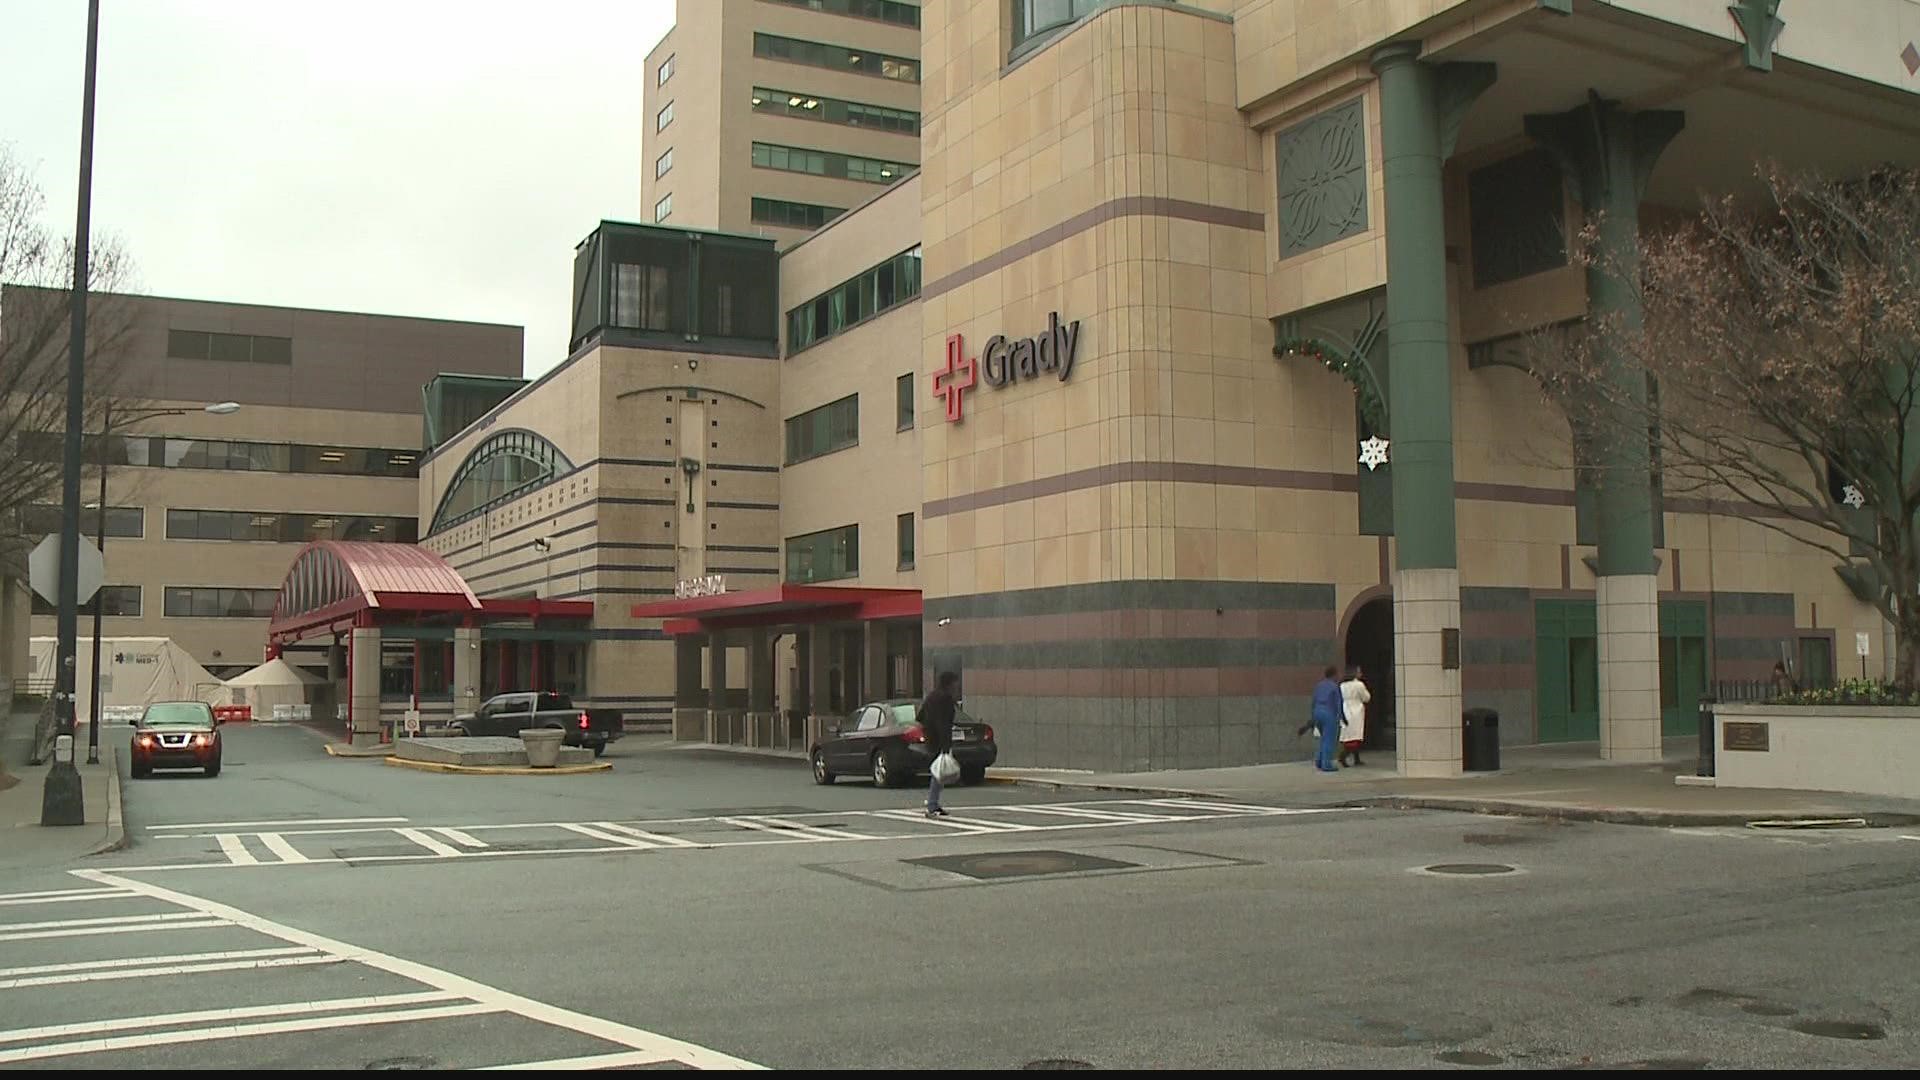 Gov. Brian Kemp announced Thursday that $130 million will be made available to Grady Hospital to expand by 200 beds.